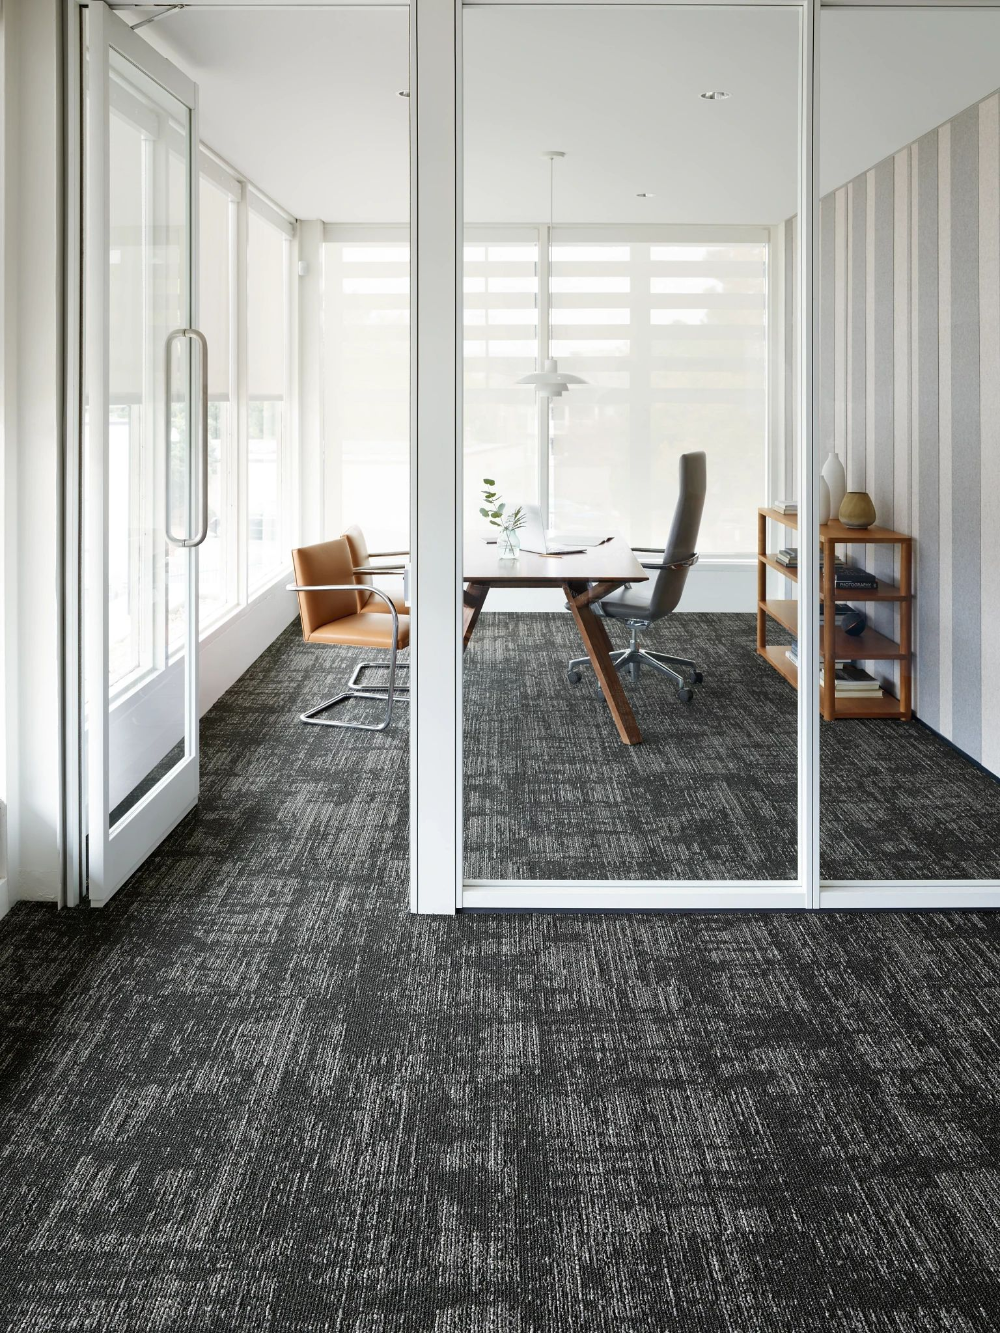 The Benefits of Commercial Carpet in
Office Spaces